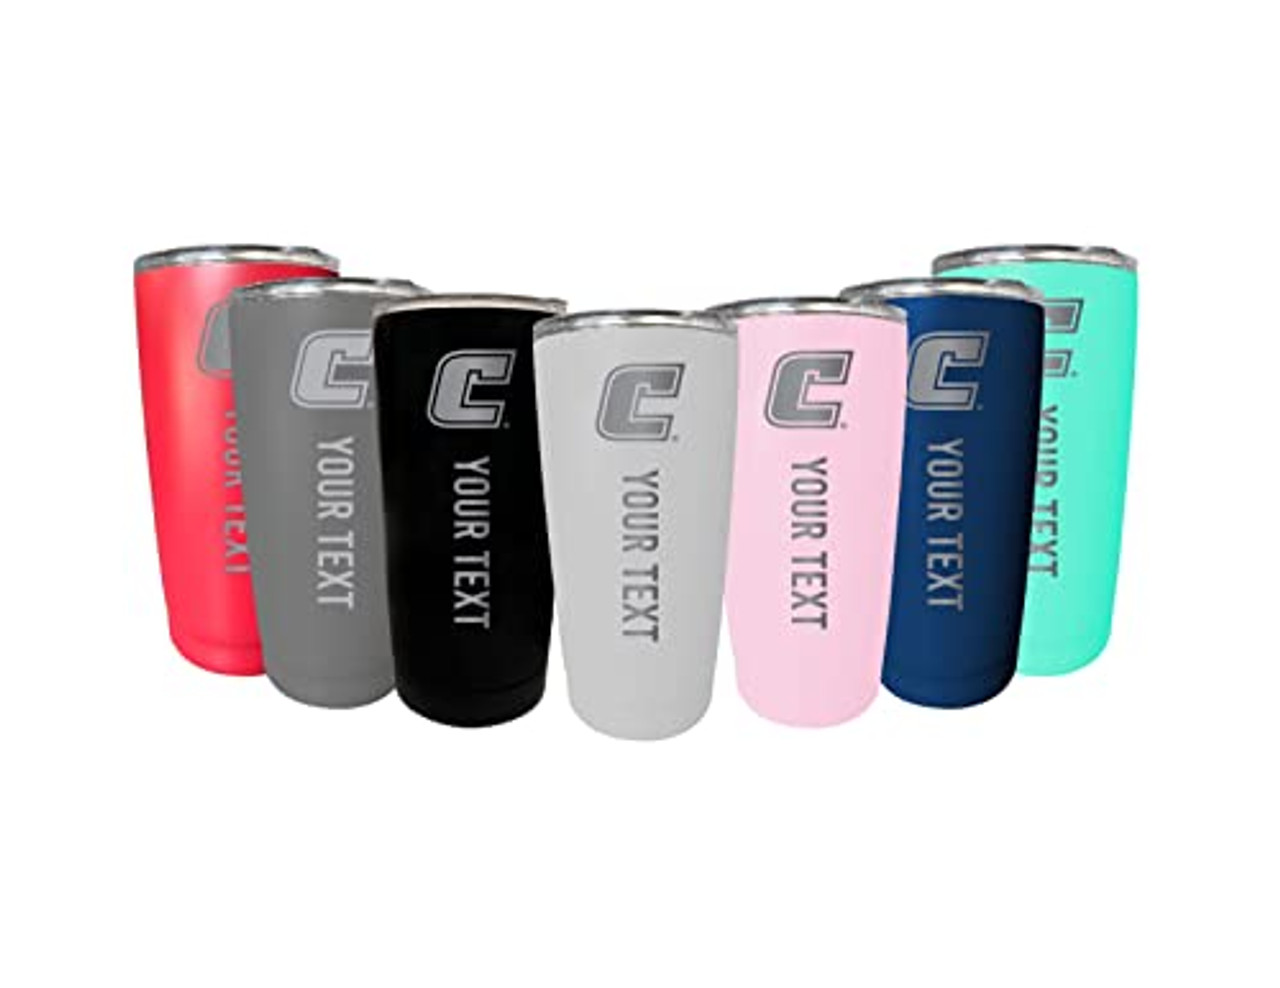 Collegiate Custom Personalized University of Tennessee at Chattanooga 16 oz Etched Insulated Stainless Steel Tumbler with Engraved Name Choice of Color